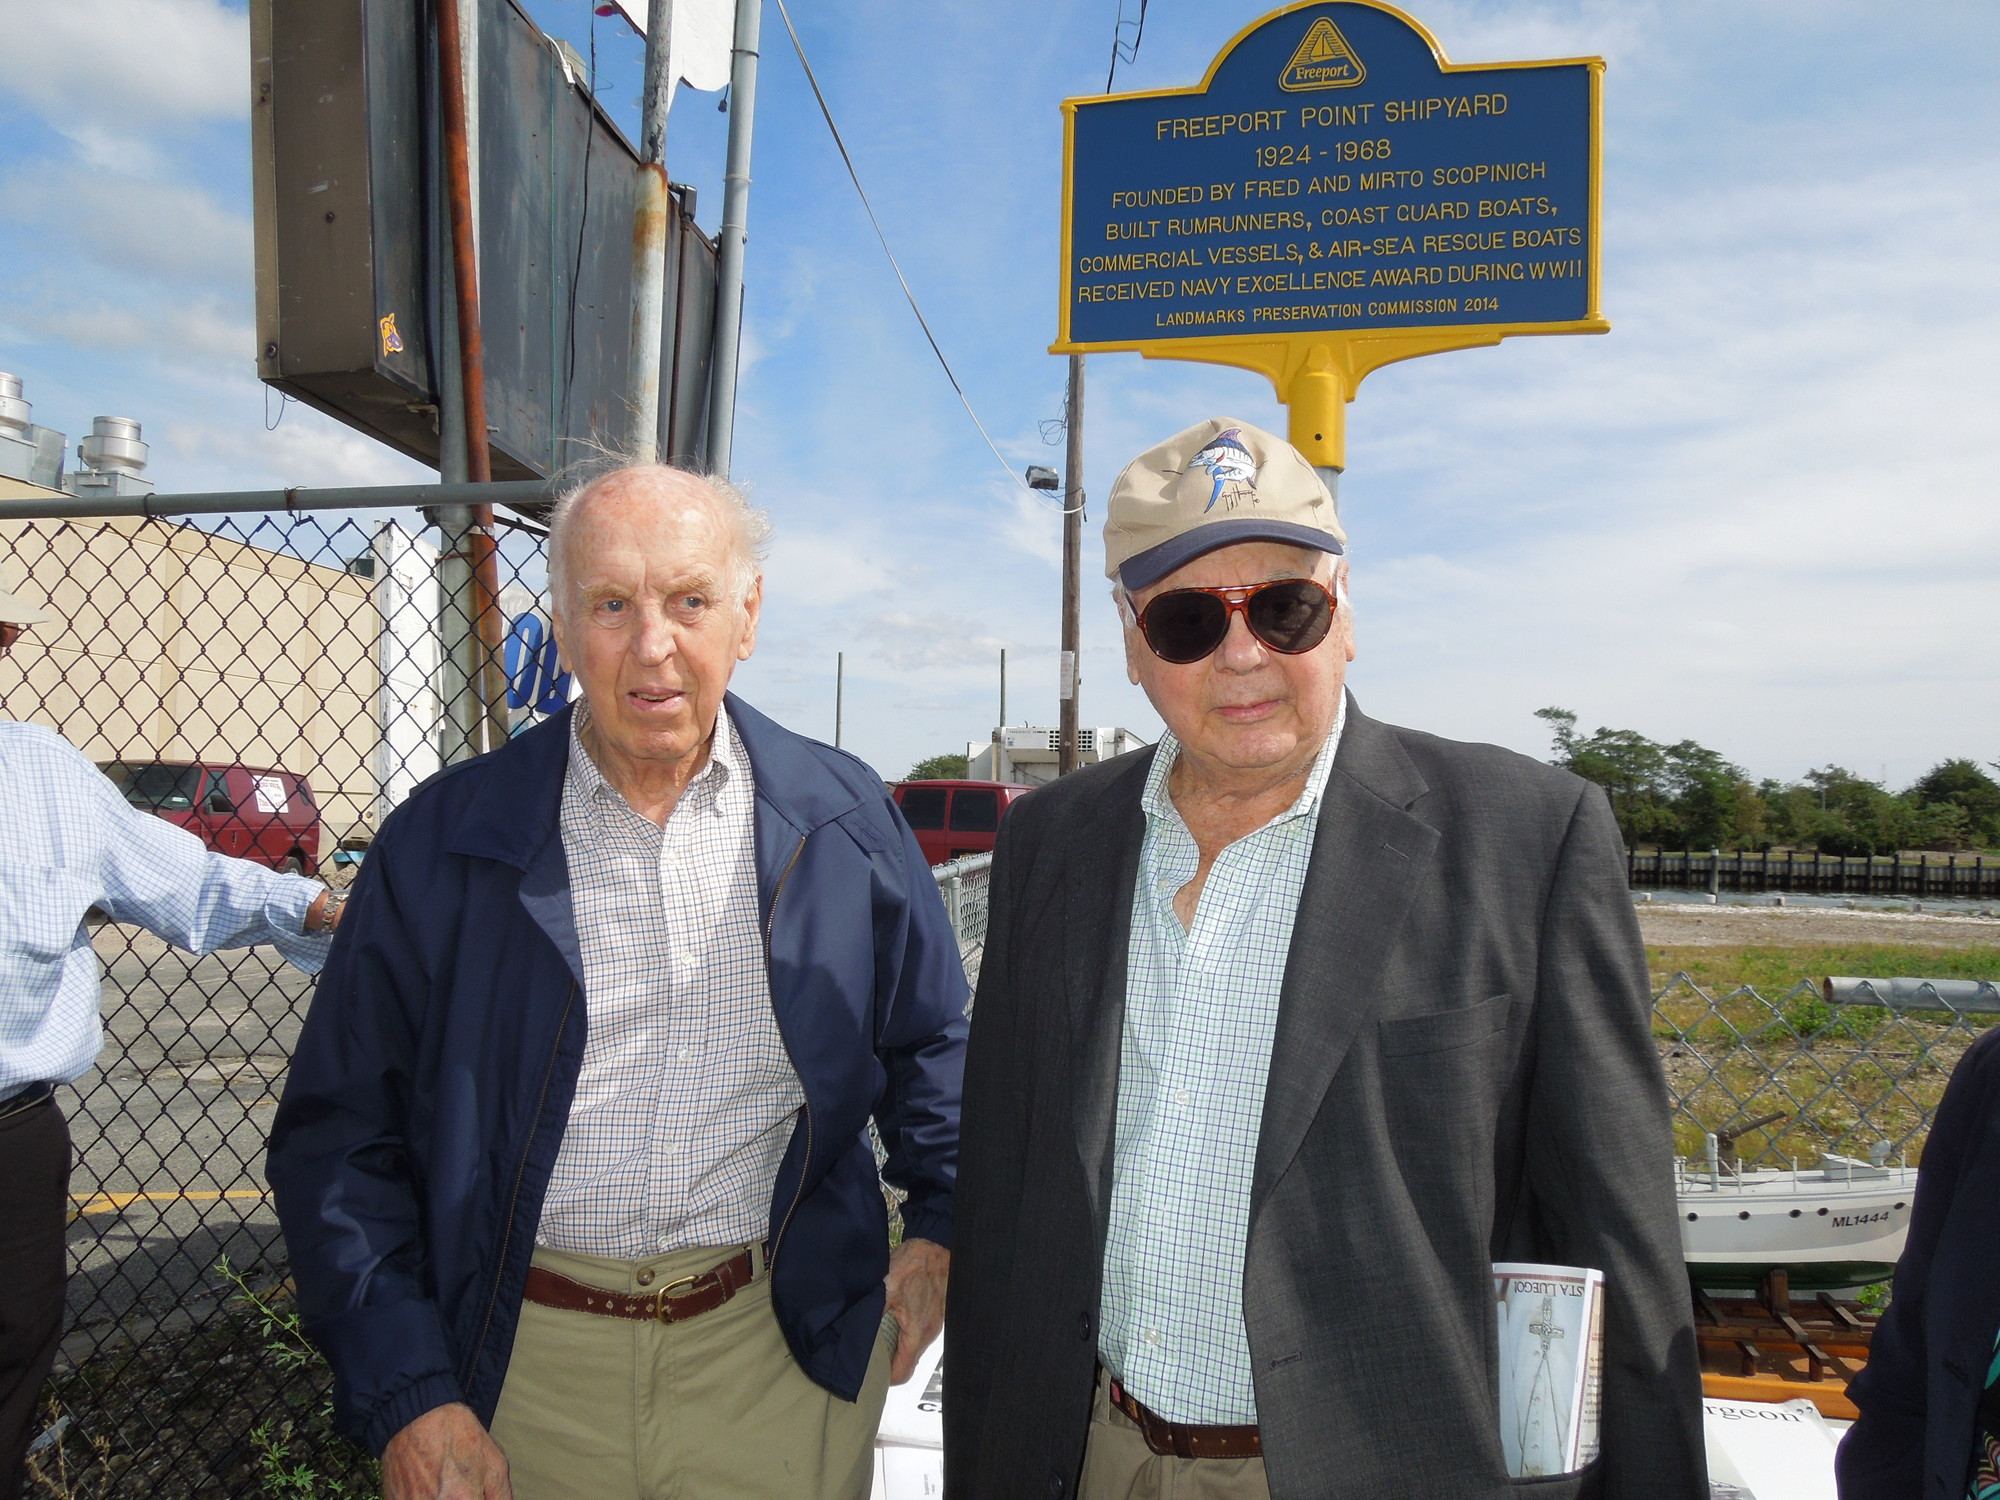 Mario and fred Scopinich unveil a marker that honors the Freeport Point Shipyard, founded by their family.